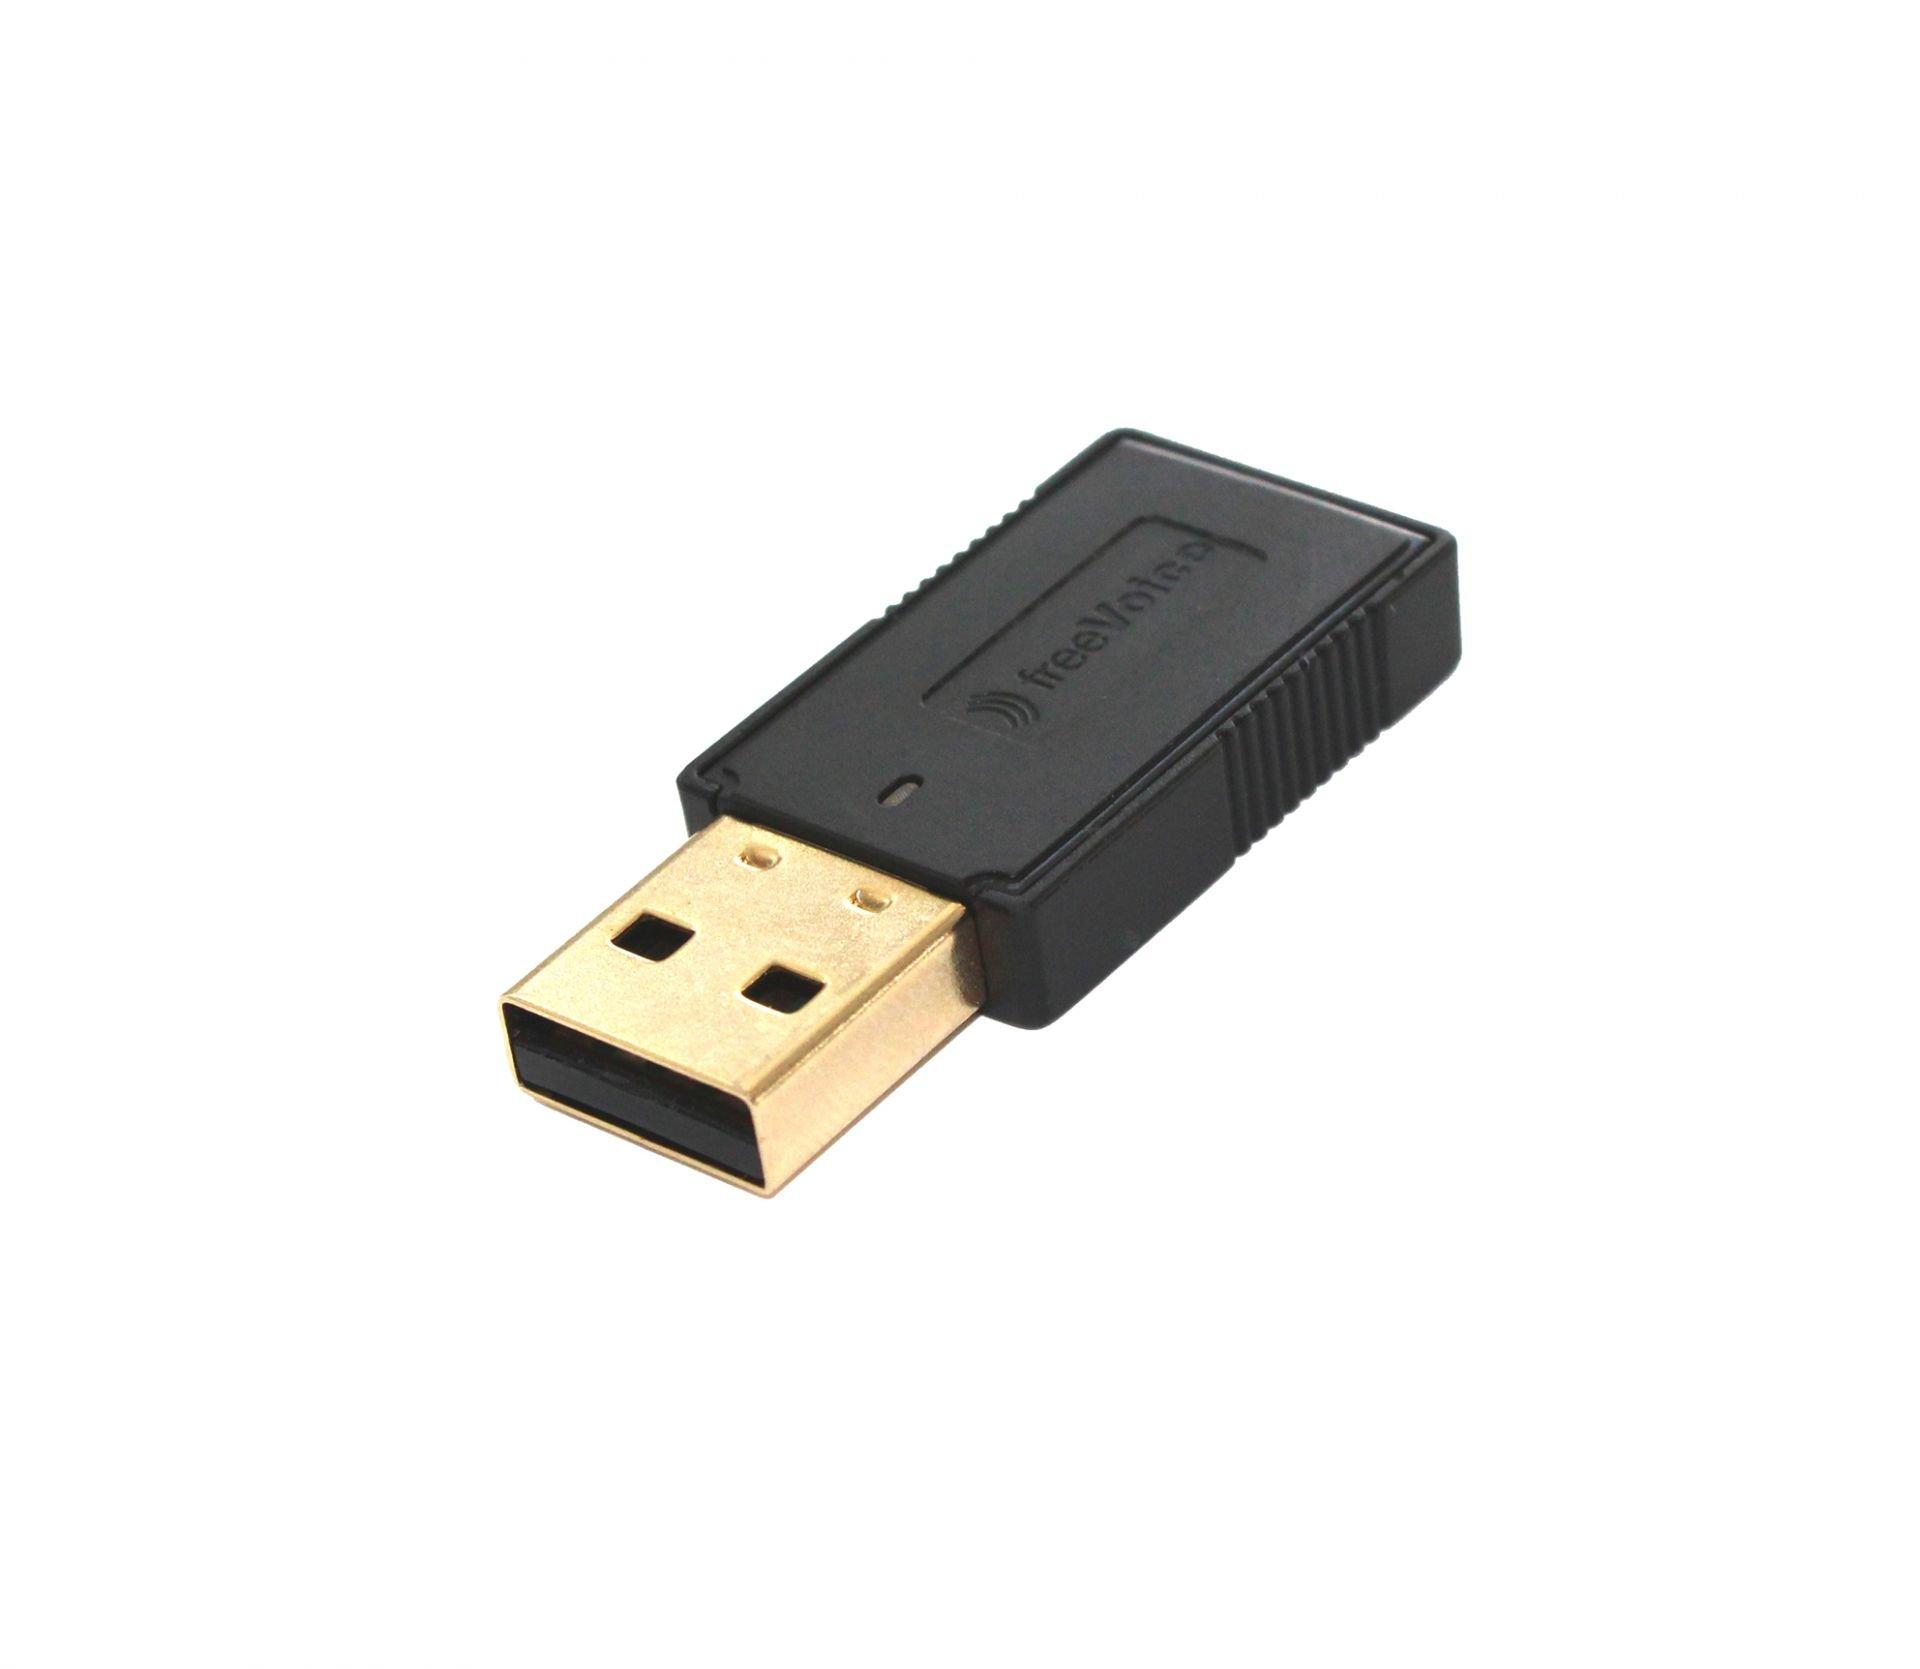 freeVoice  Connect Dongle 170 UC Interno Bluetooth 